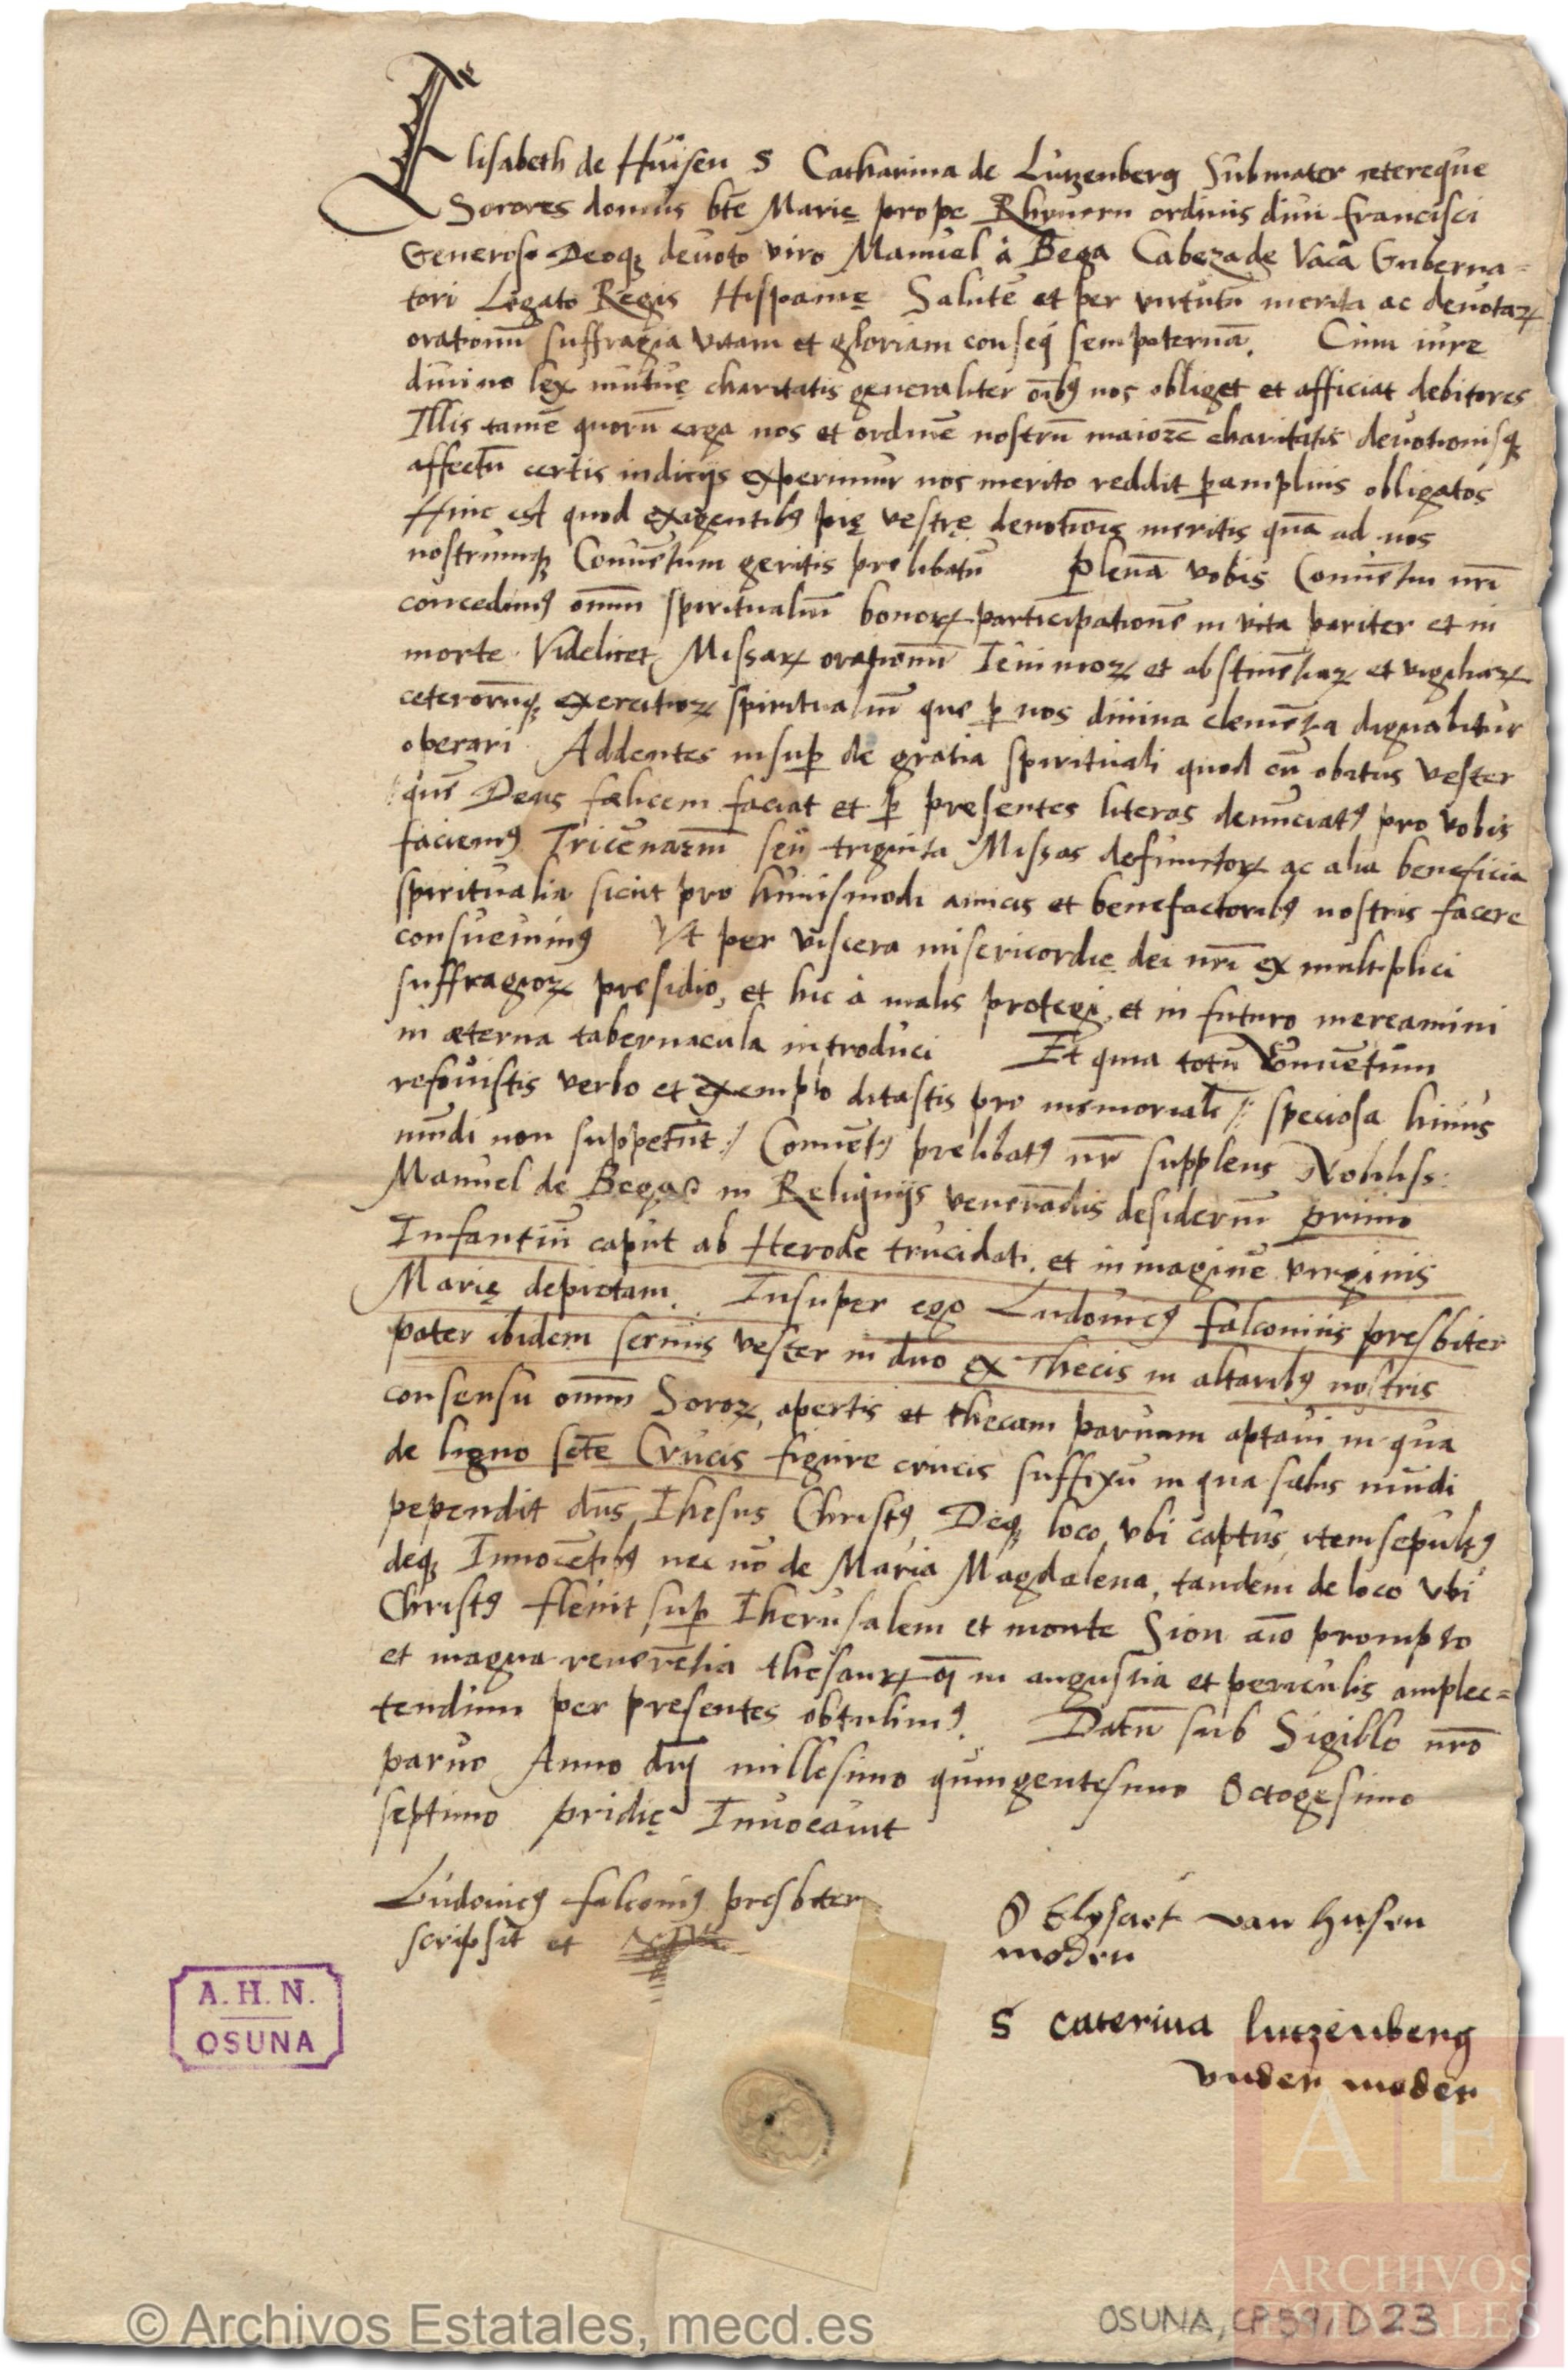 Archivo Histórico de la Nobleza, Concessions of Isabel de Hiusen and Catalina de Lizenberg, mothers of 
the Order of San Francisco, to Manuel Vega Cabeza de Vaca, captain of 
the Spanish infantry, governor, and envoy of the king of Spain in 
Germany, avalaible here 
		